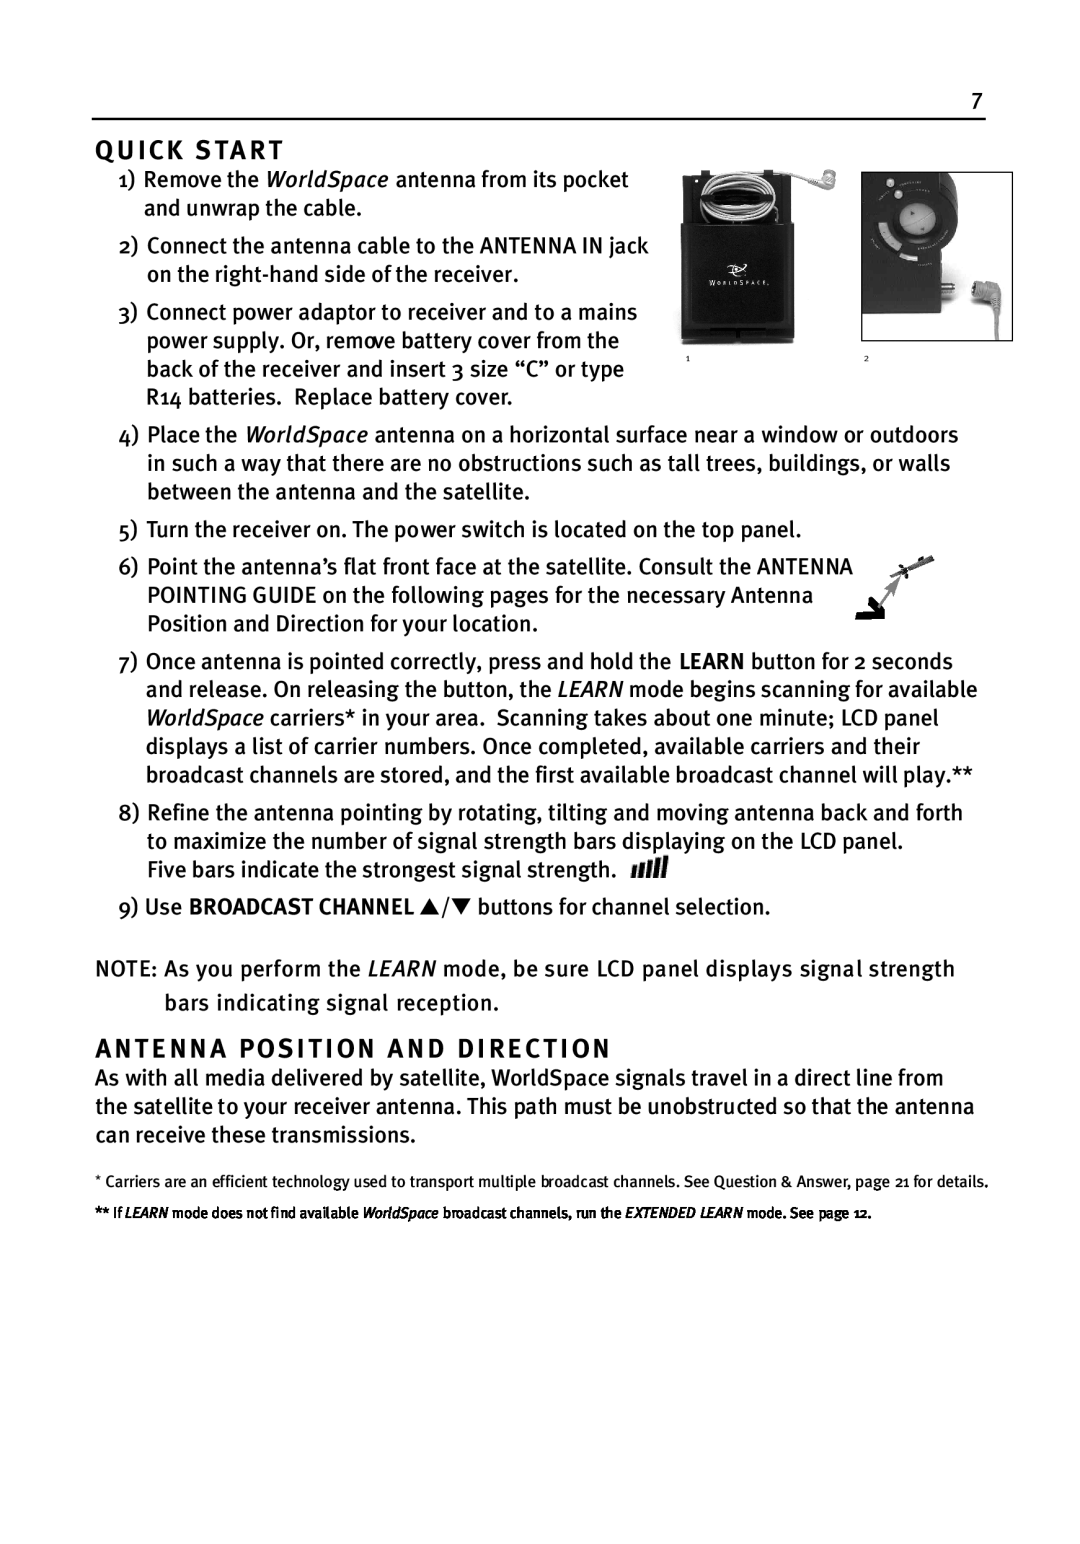 WorldSpace wssr-11 manual Quick Sta R T, Antenna Position And Direction 